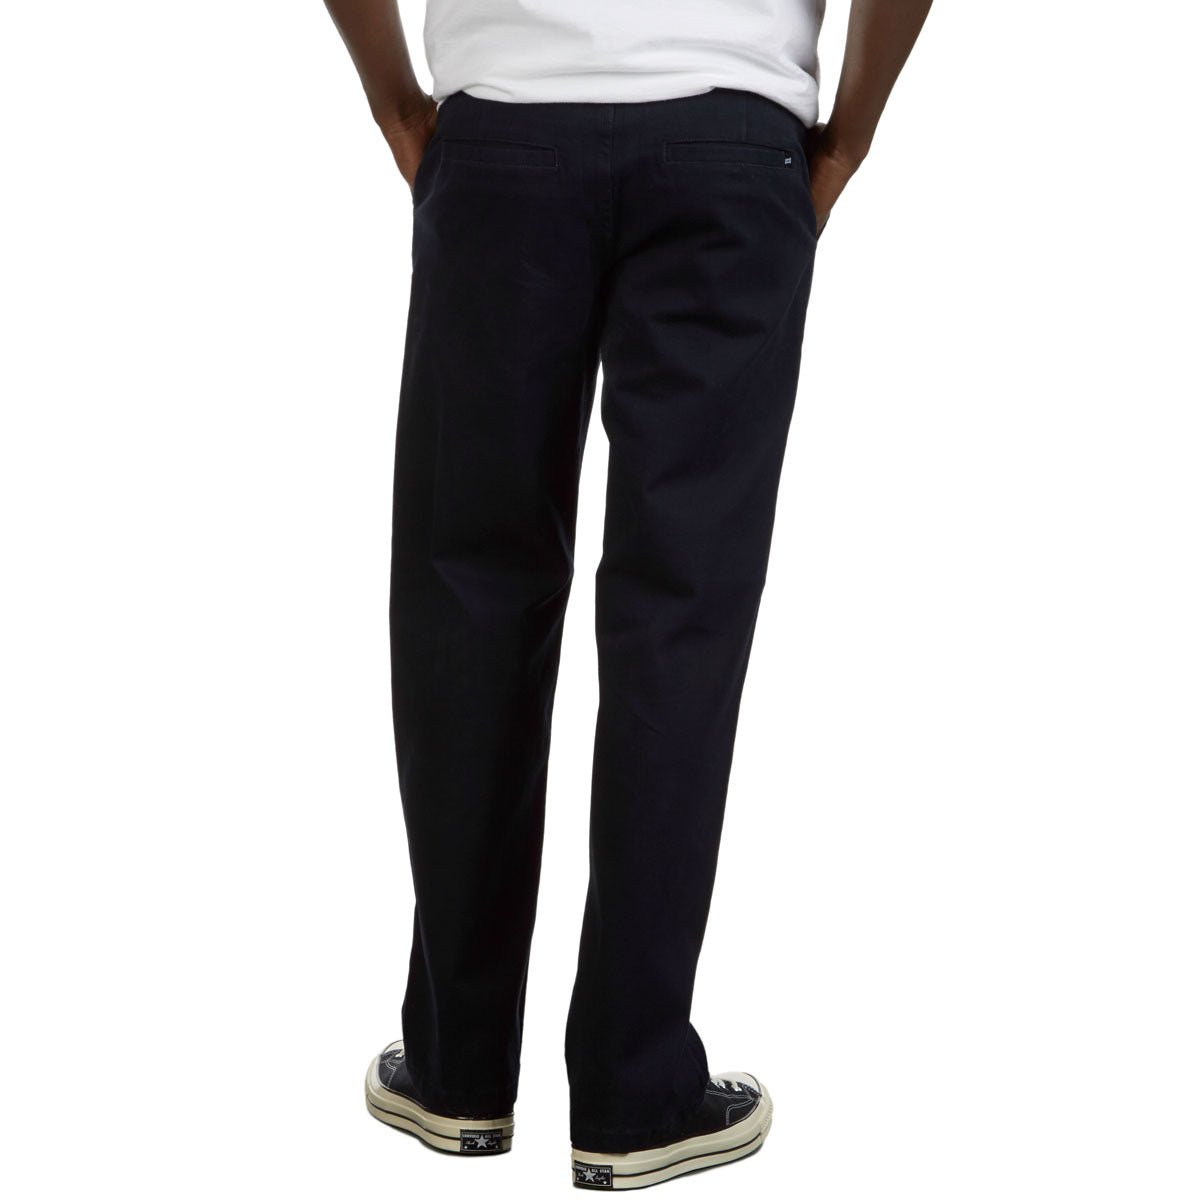 CCS Standard Plus Relaxed Chino Pants - Navy image 3